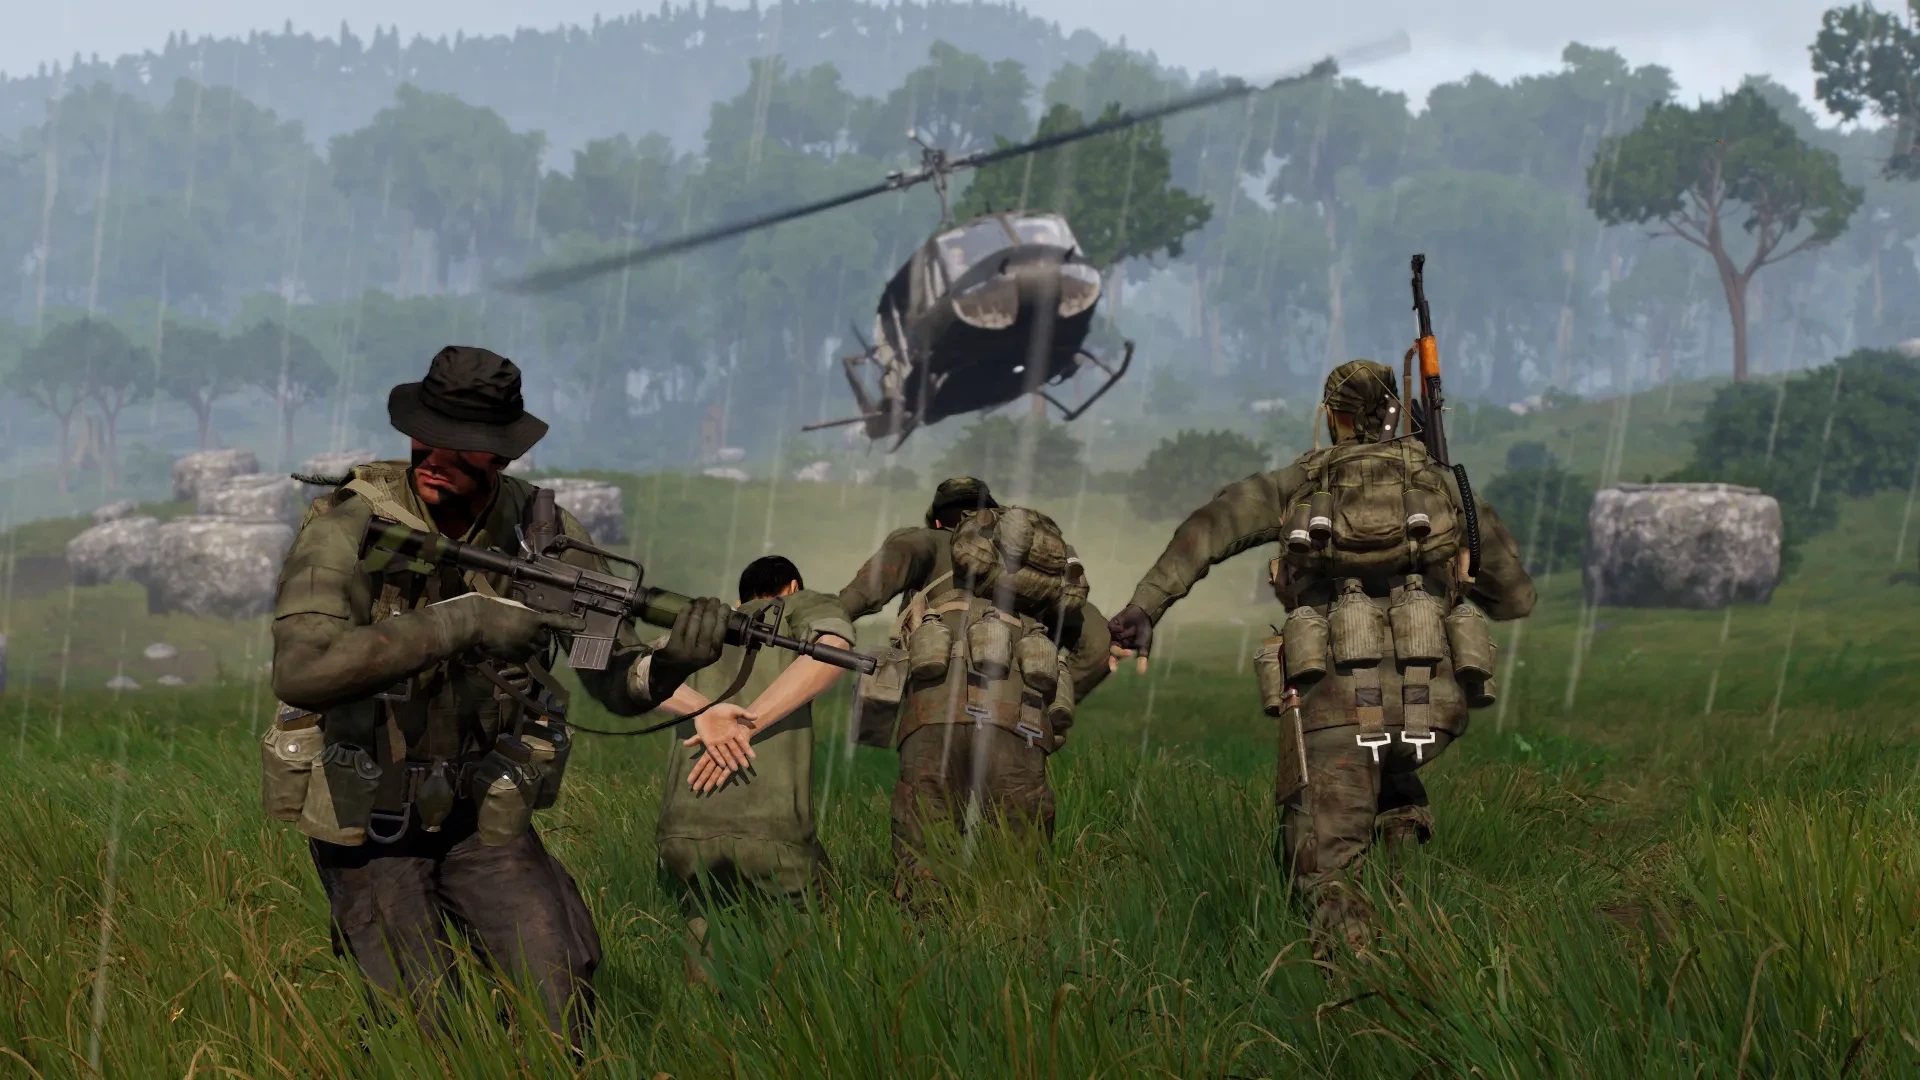 Arma 3 Join Macv Sog Rt Columbia As They Go Over The Fence And Conduct Secret Missions In Laos And Cambodia In Arma3 S O G Prairie Fire Cdlc S Harrowing 14 Player Co Op